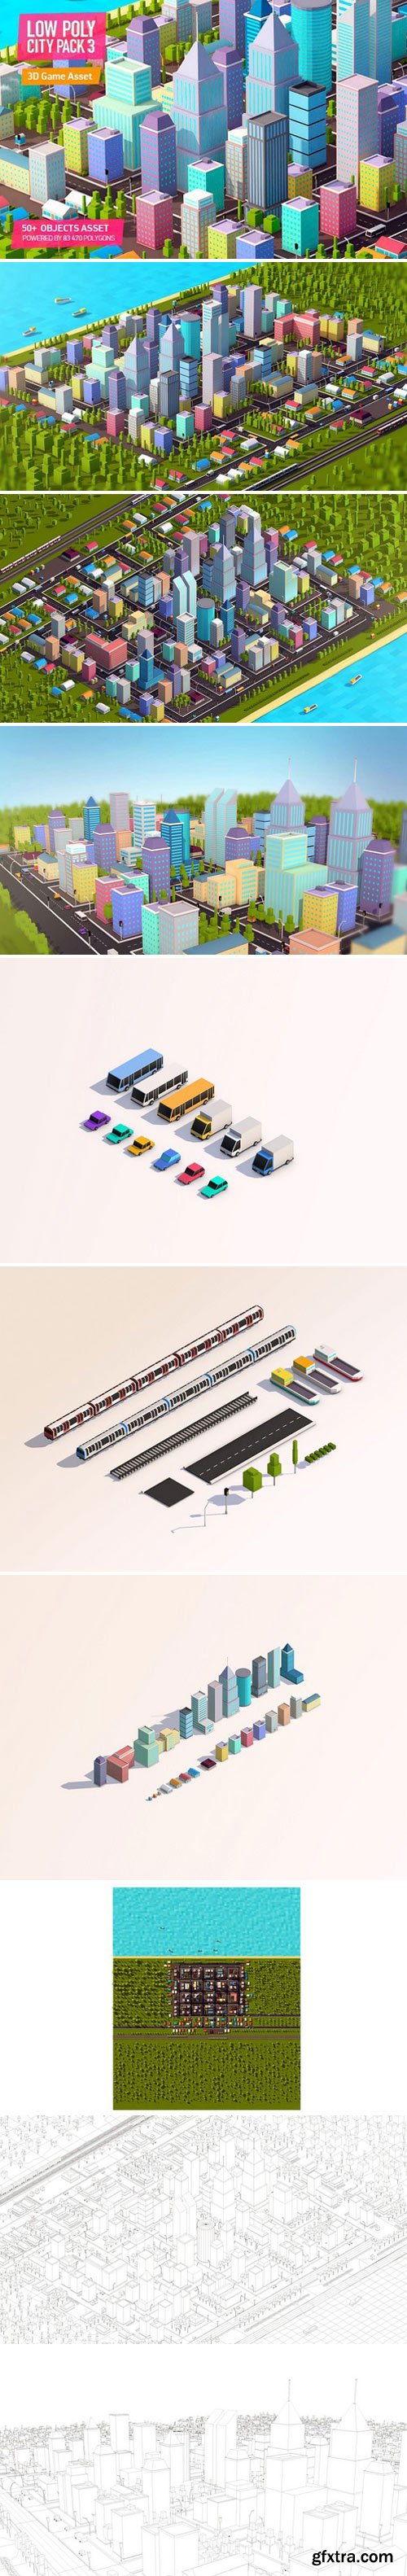 CM - Low Poly City Pack 3 1452374